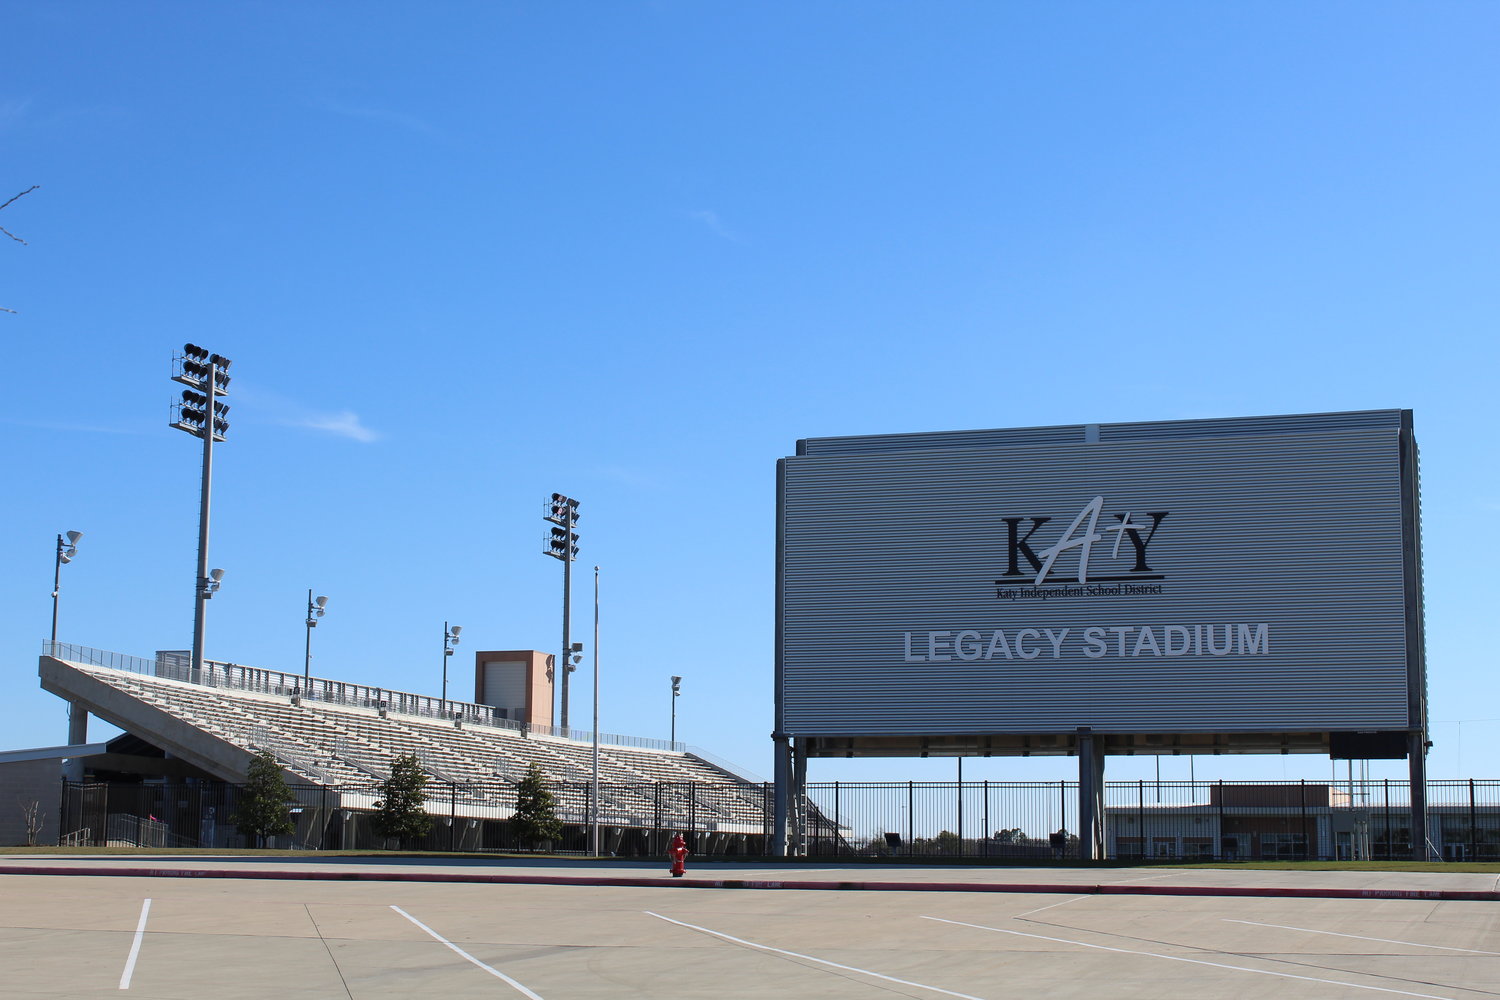 Katy ISD is calling for a bond election in May and in order to address growth by adding campuses and facilities to accommodate new students projected to come to the district over the next decade or so. The district has a long history of bonds, including a $748 million bond package in 2014 that paid for multiple new campuses and Legacy Stadium (pictured) which cost about $70.3 million.